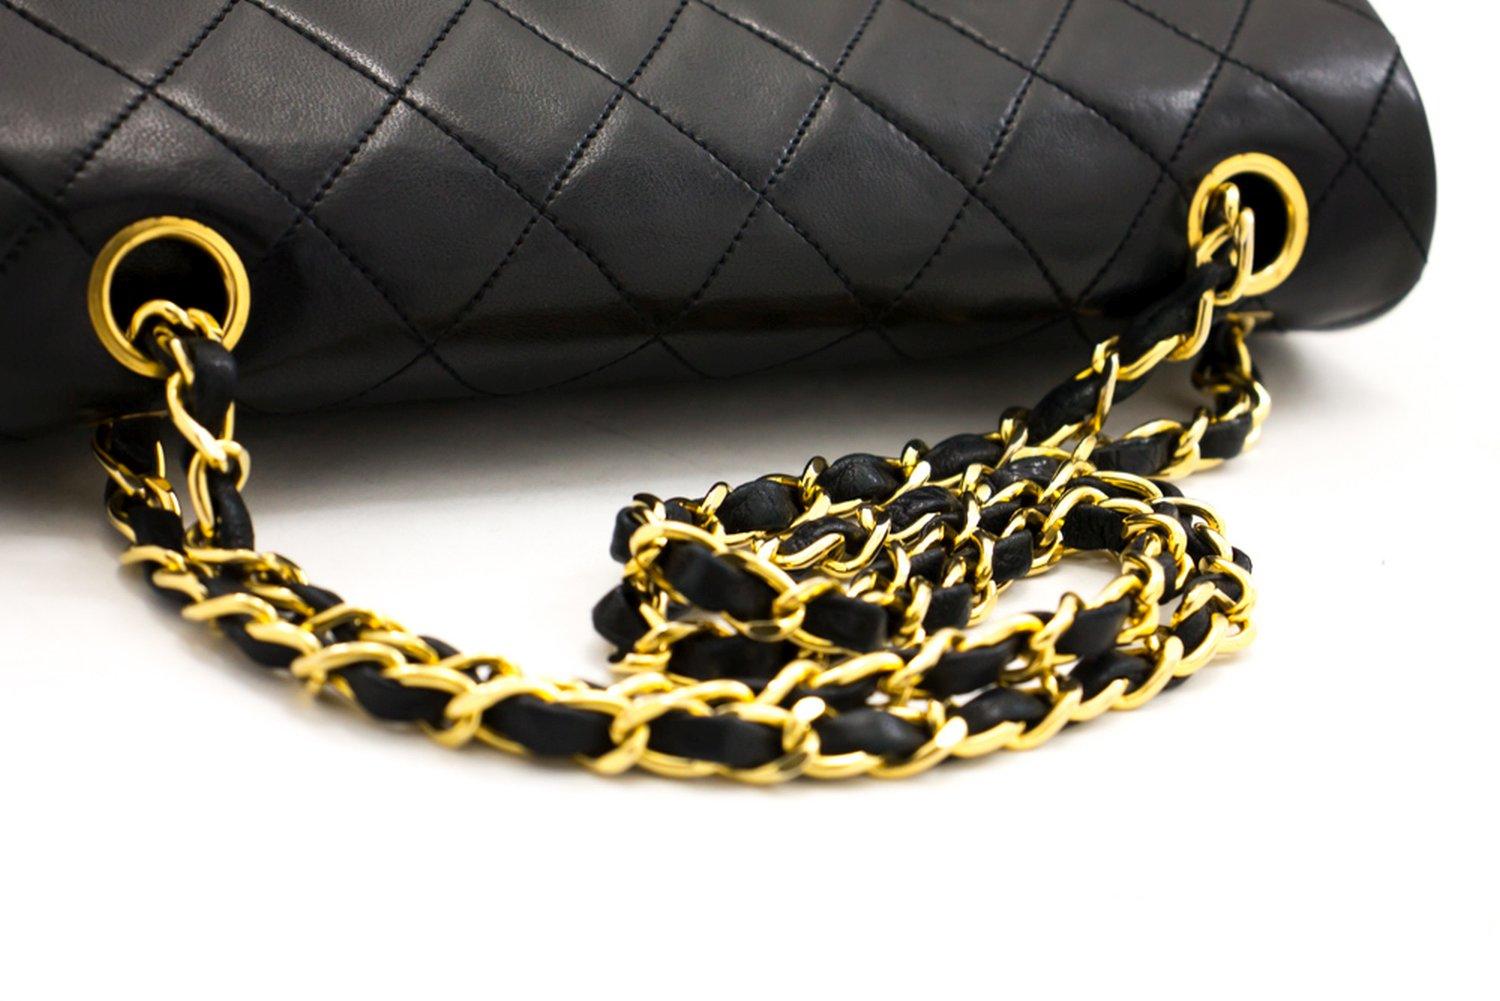 CHANEL 2.55 Double Flap Small Chain Shoulder Bag Lambskin Black For Sale 8